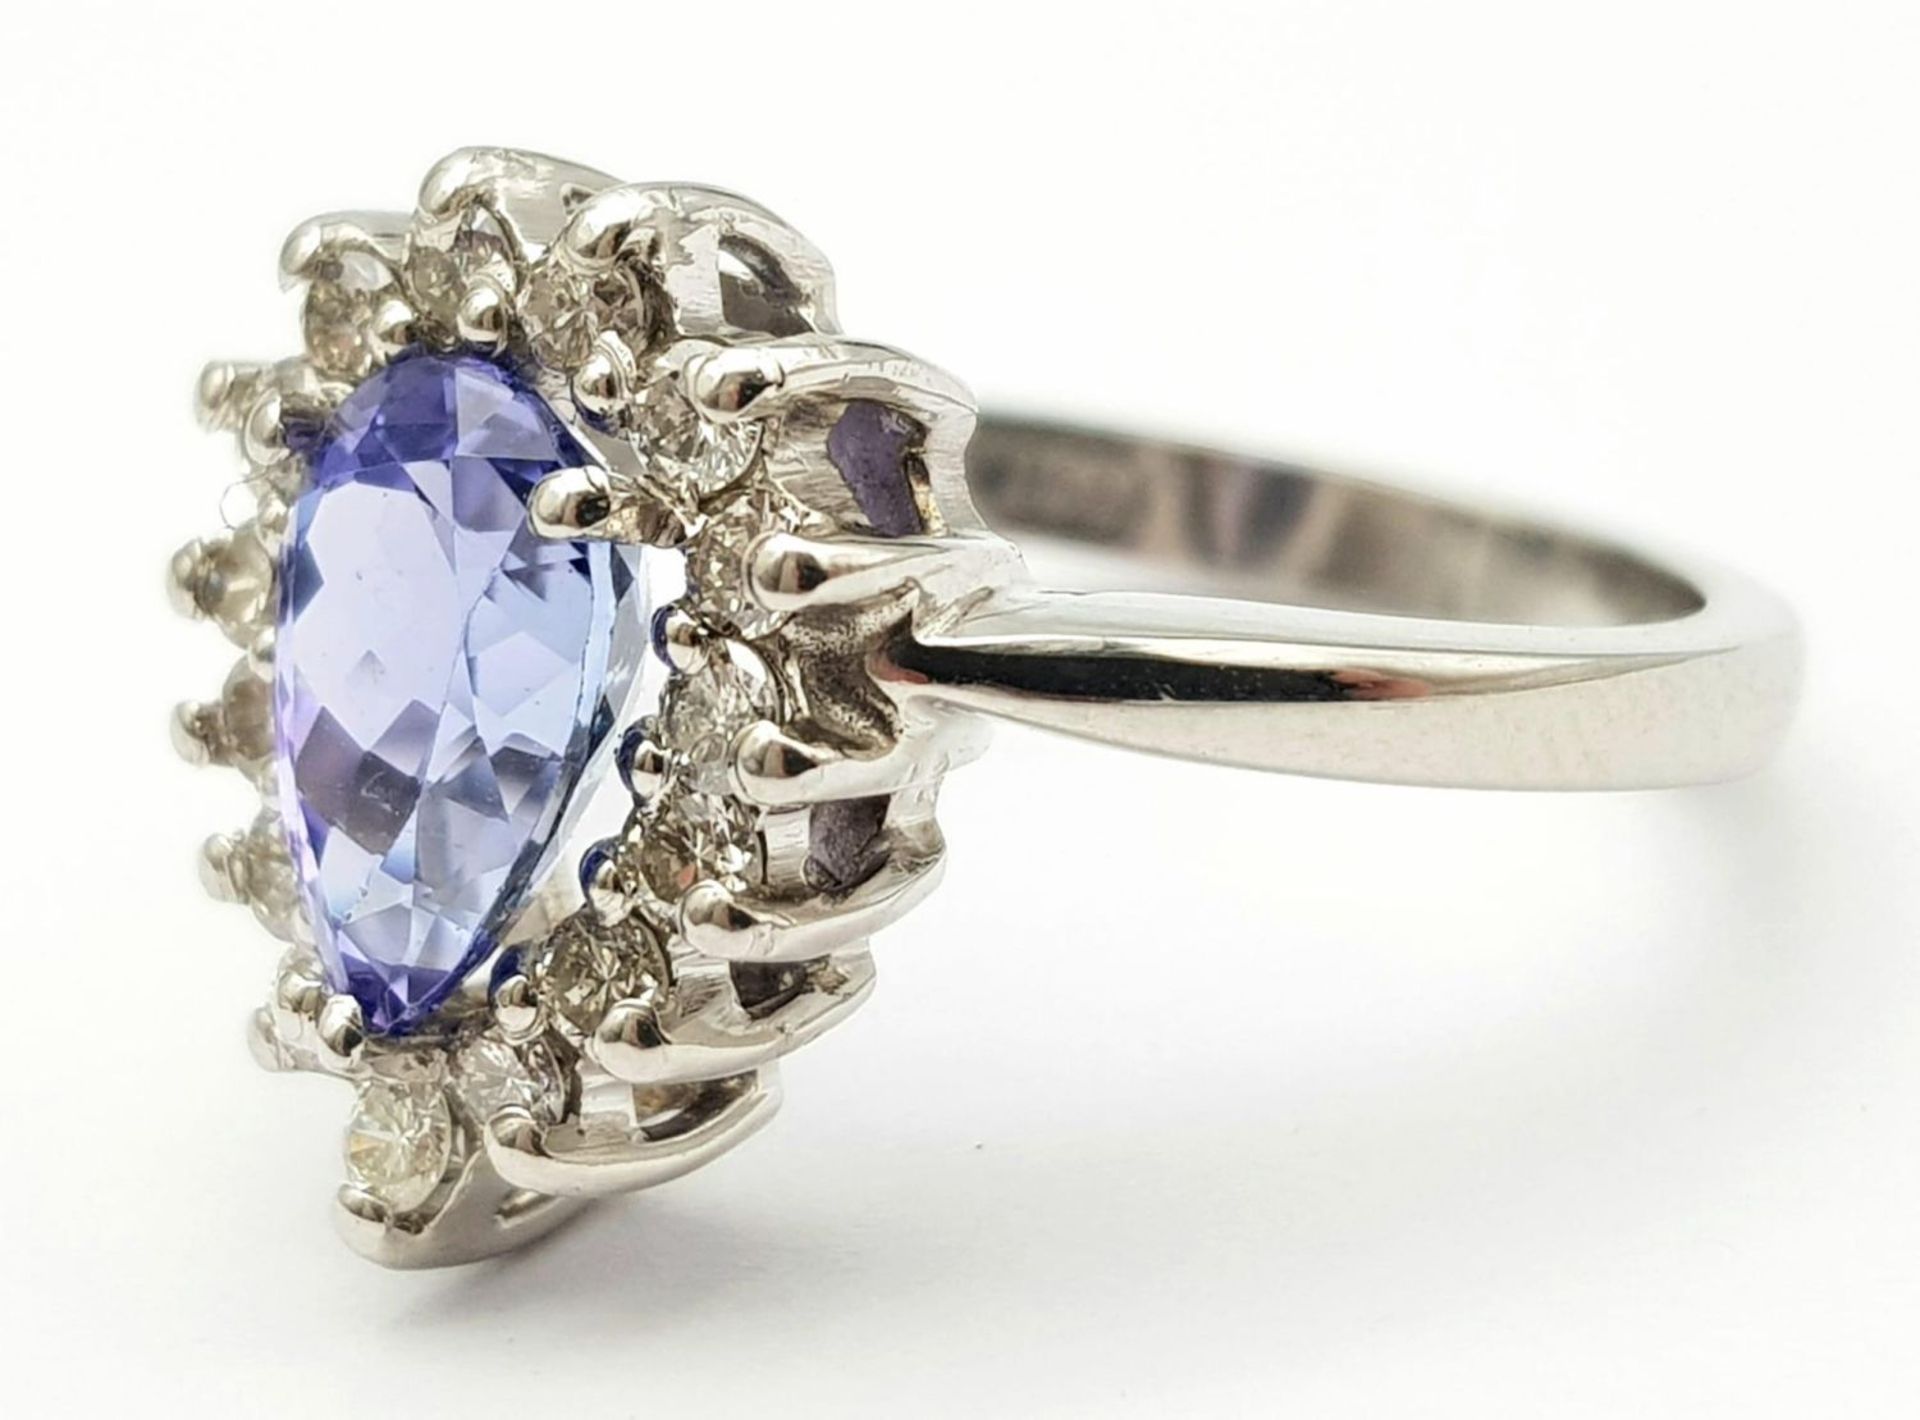 An 18 K white gold ring with a pear cut tanzanite (1.71 carats) surrounded by a halo of diamonds, - Image 7 of 12